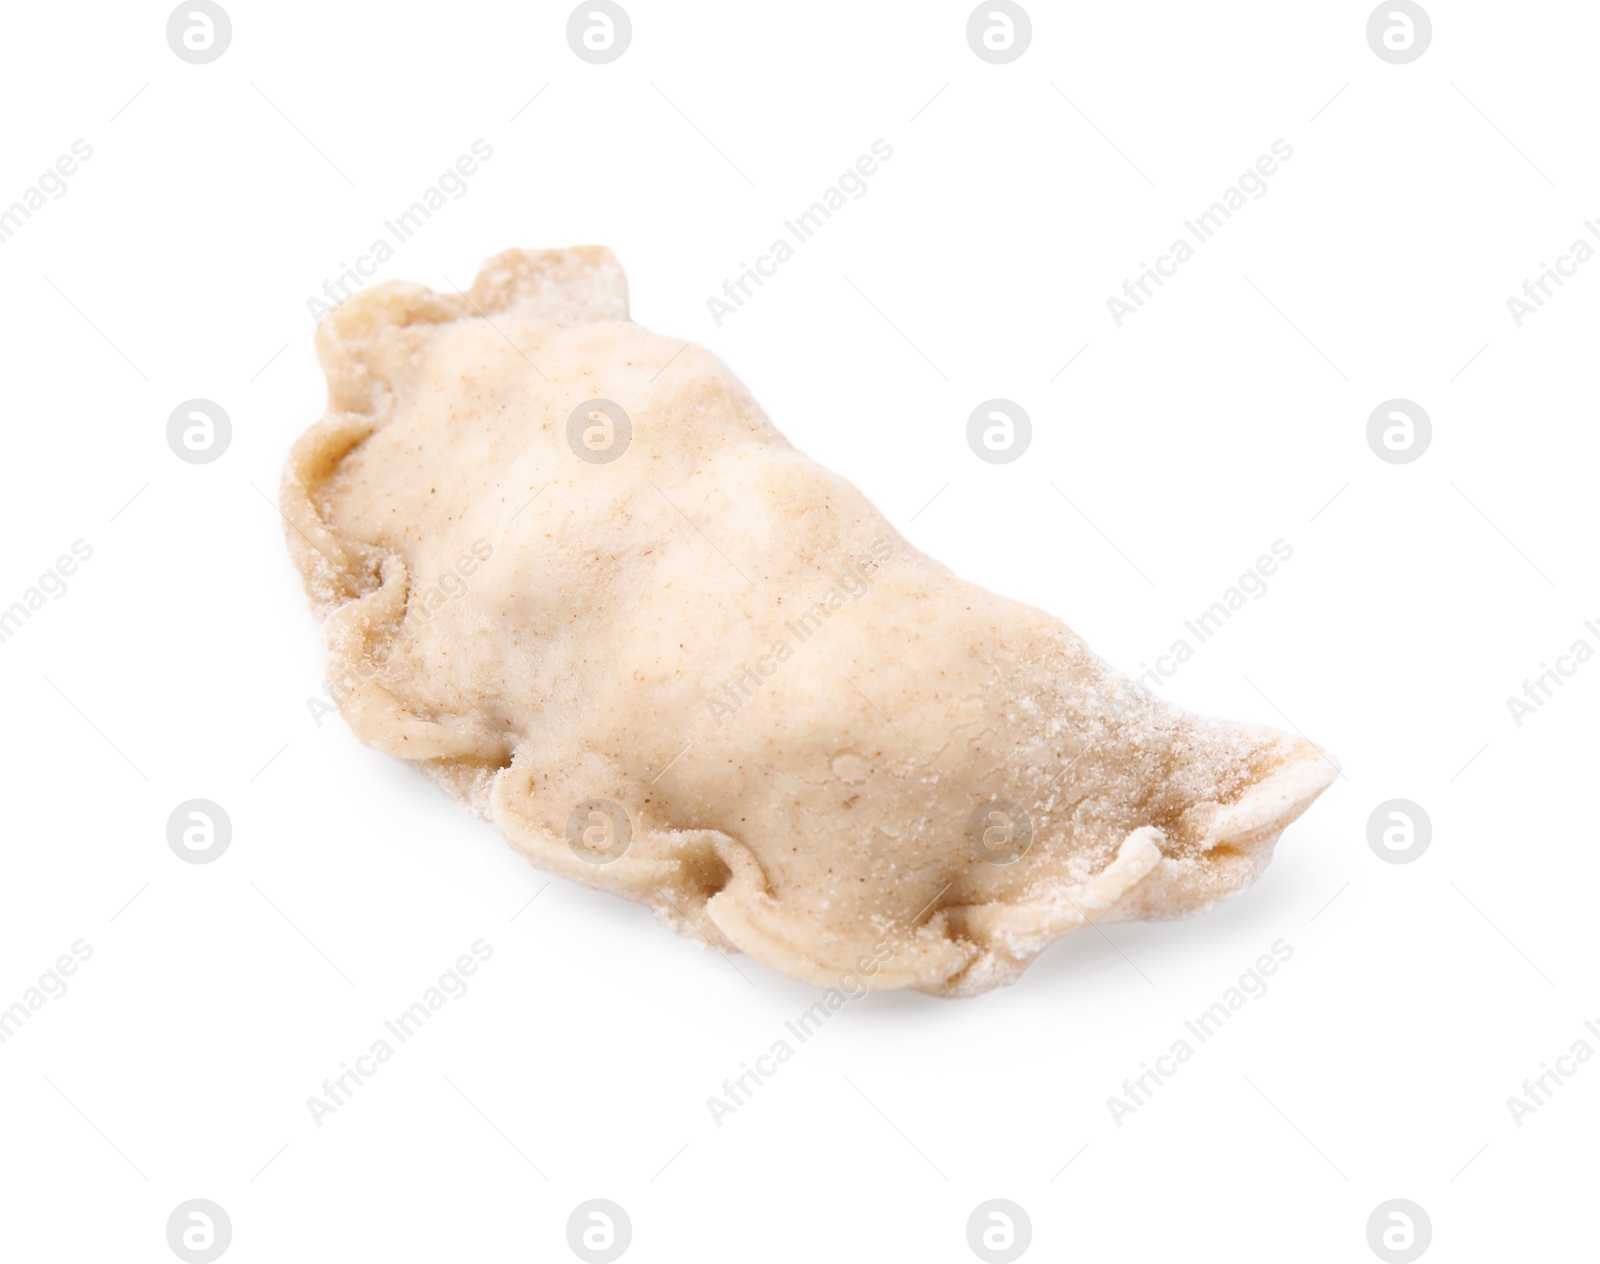 Photo of Raw dumpling (varenyk) with cottage cheese isolated on white